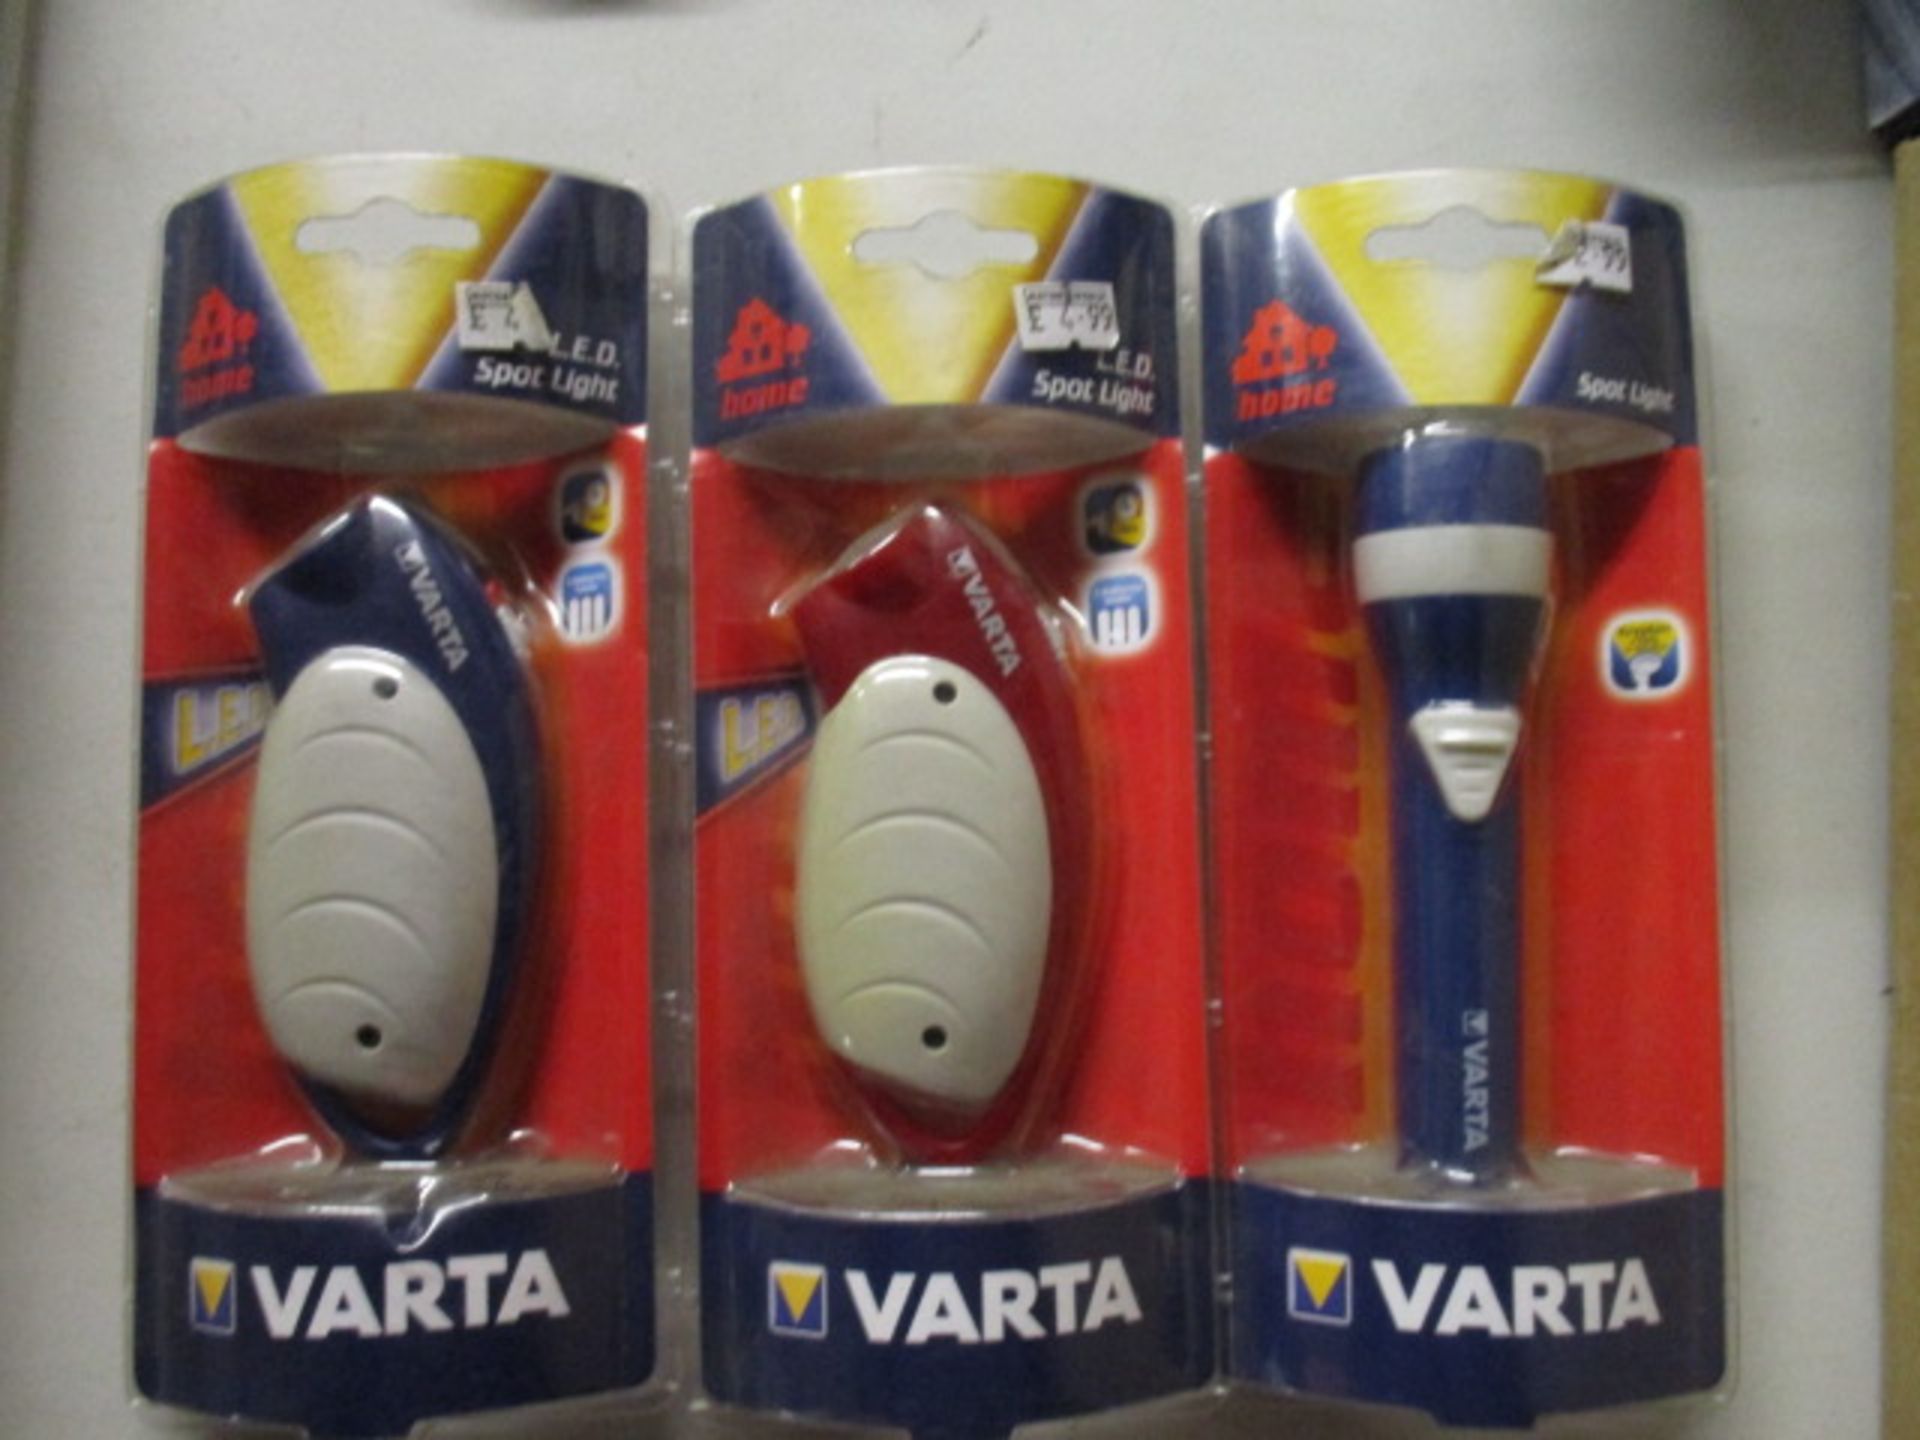 3 x assorted Varta torches - new and boxed